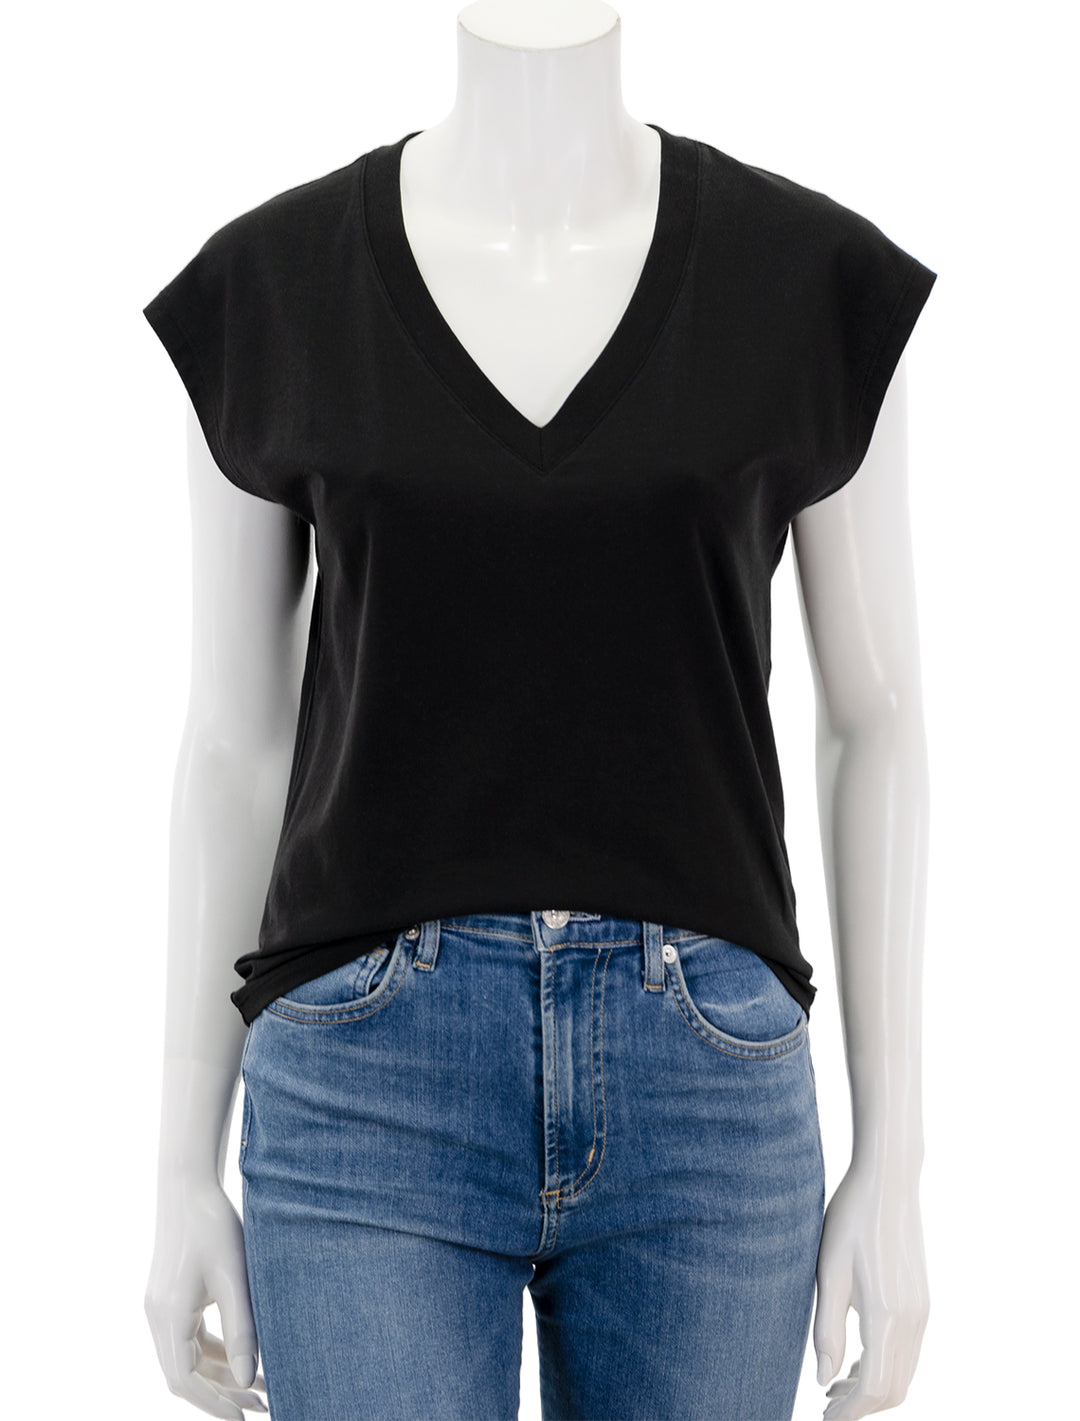 Front view of Patrick Assaraf's iconic vneck dolman tee in black.